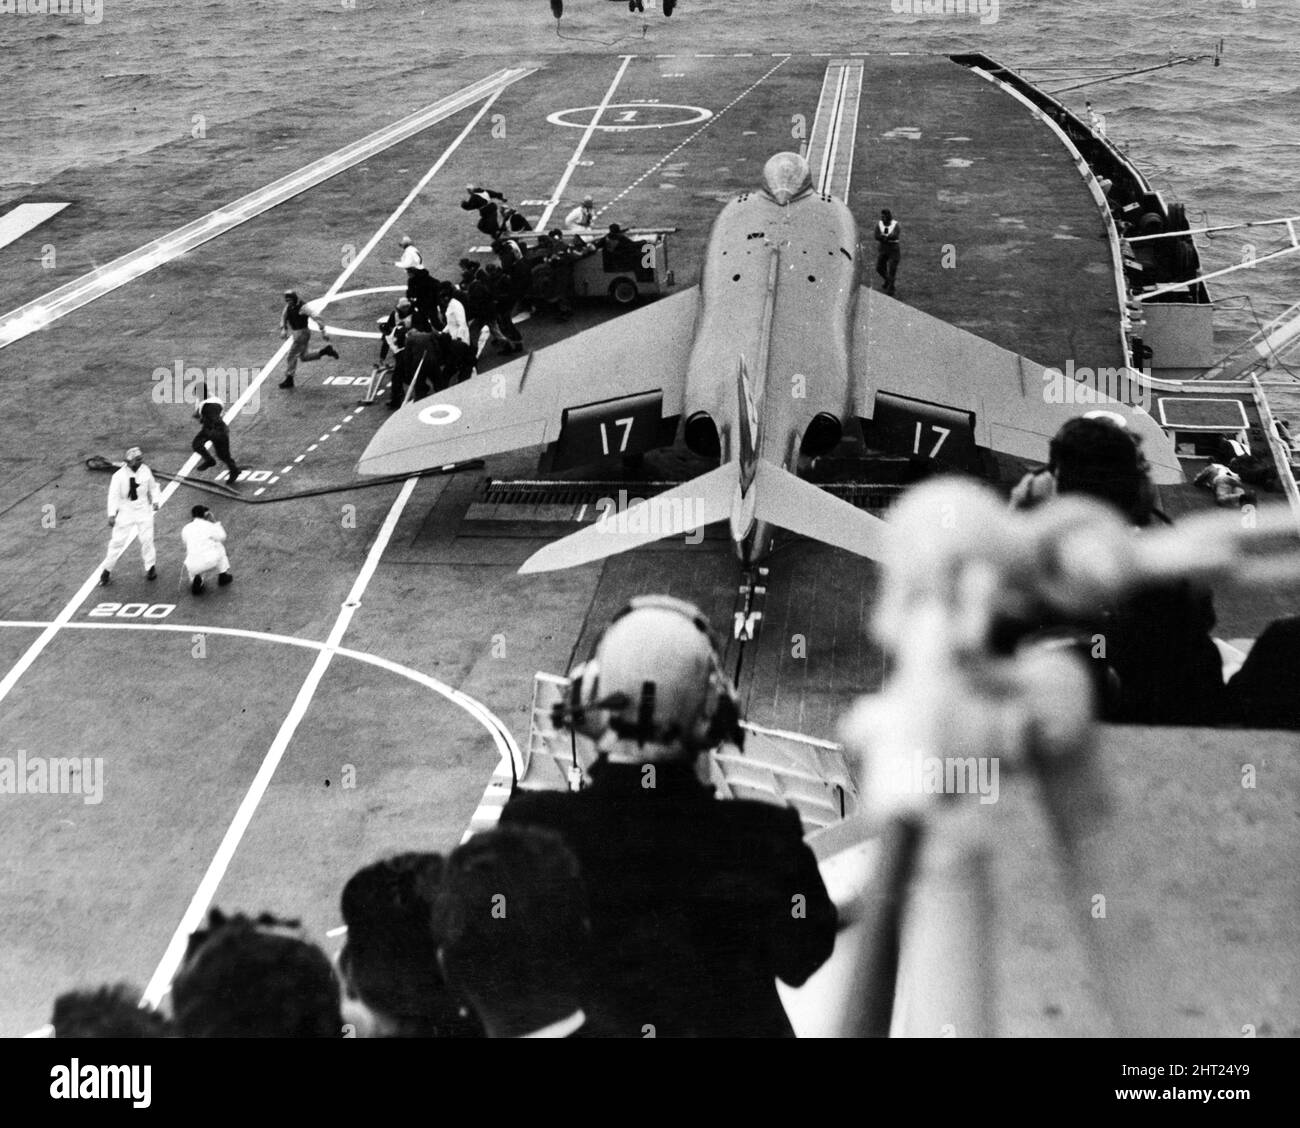 A supermarine Scimitar is manoeuvred on to the starboard catapult ready for take off on the deck of HMS Centaur, during a farewell exercise by the Fleet squadron. Liverpool, Merseyside, 19th August 1965. Stock Photo